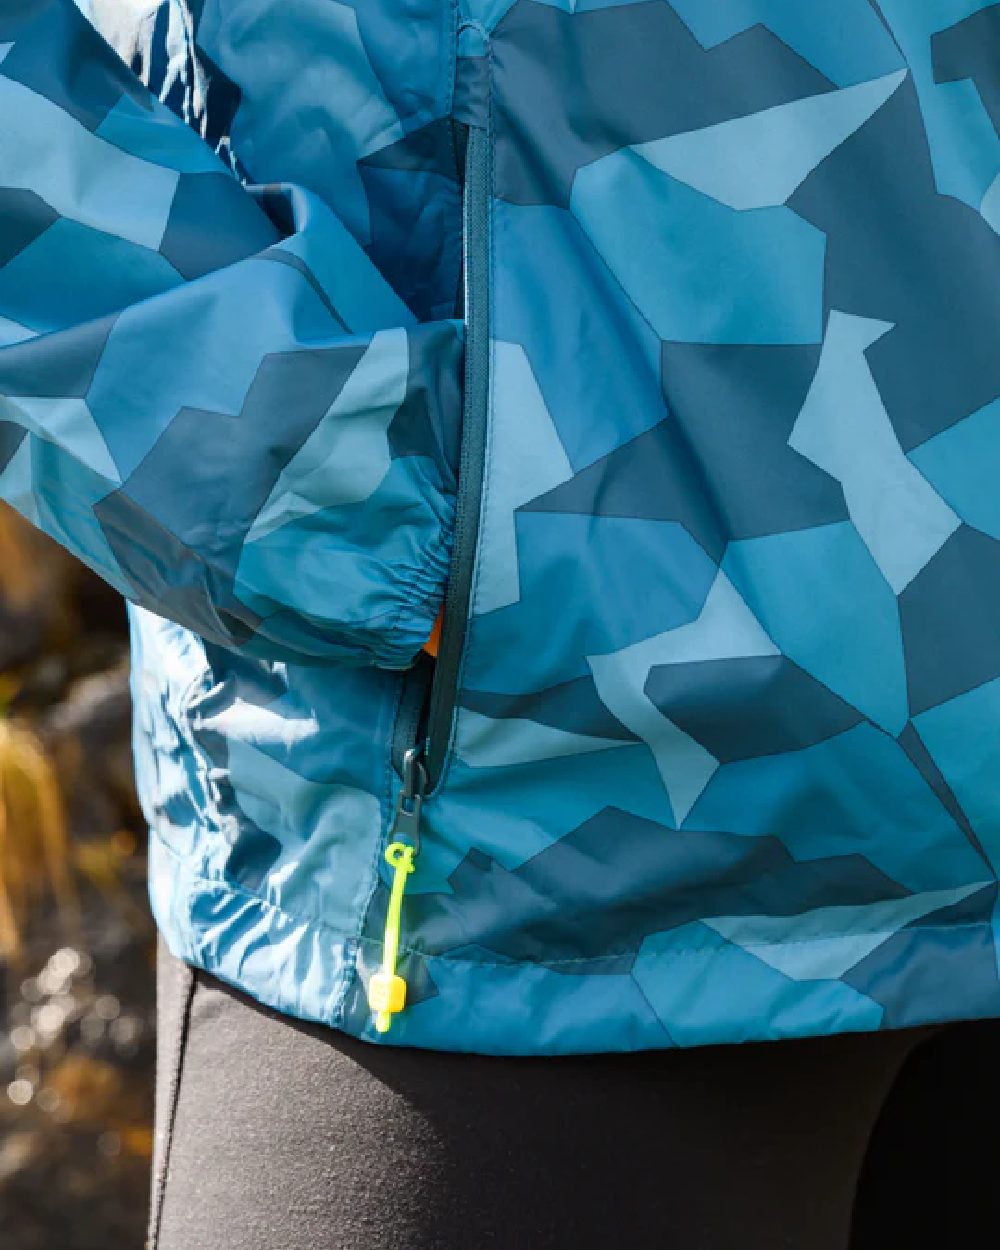 Teal Camo coloured Mac In A Sac Packable Origin Camo Waterproof Jacket on blurry background 